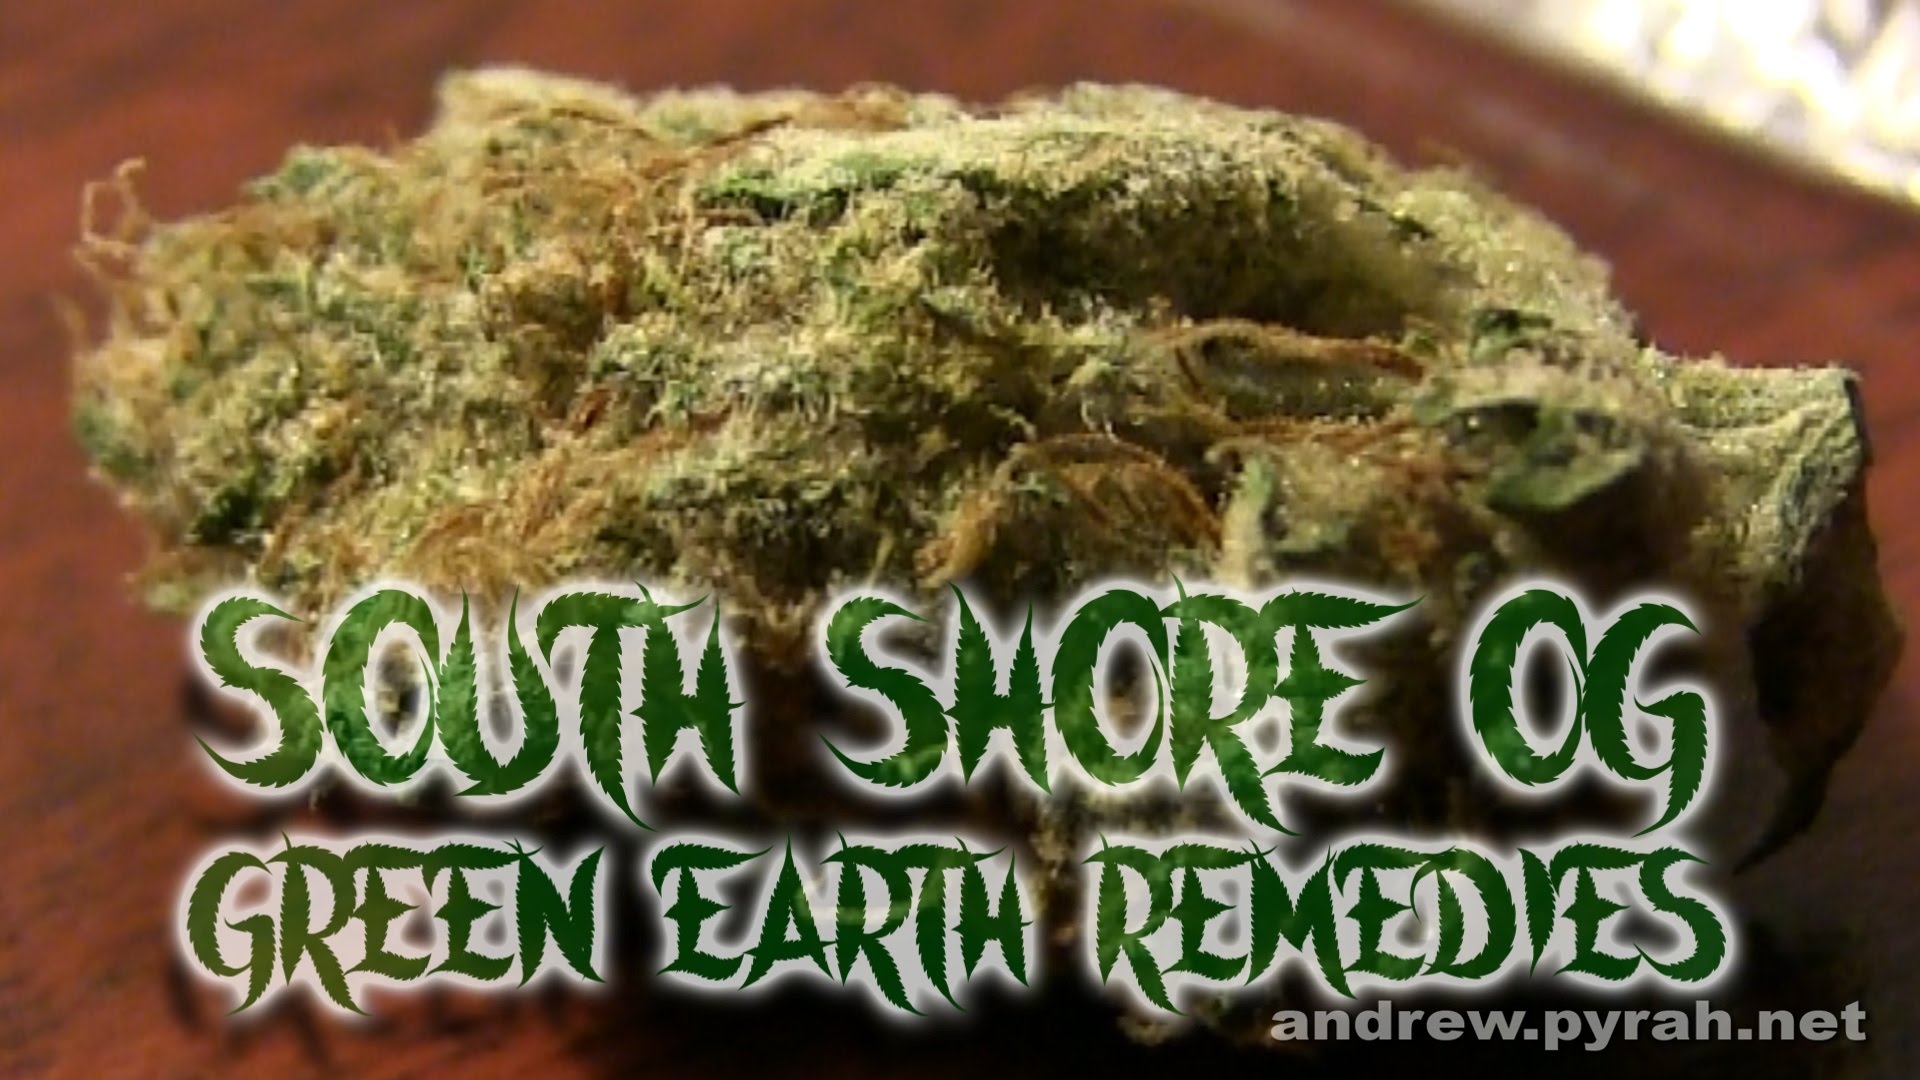 SOUTH SHORE OG – Green Earth Remedies Dispensary – Amsterdam Weed Review in California 2015